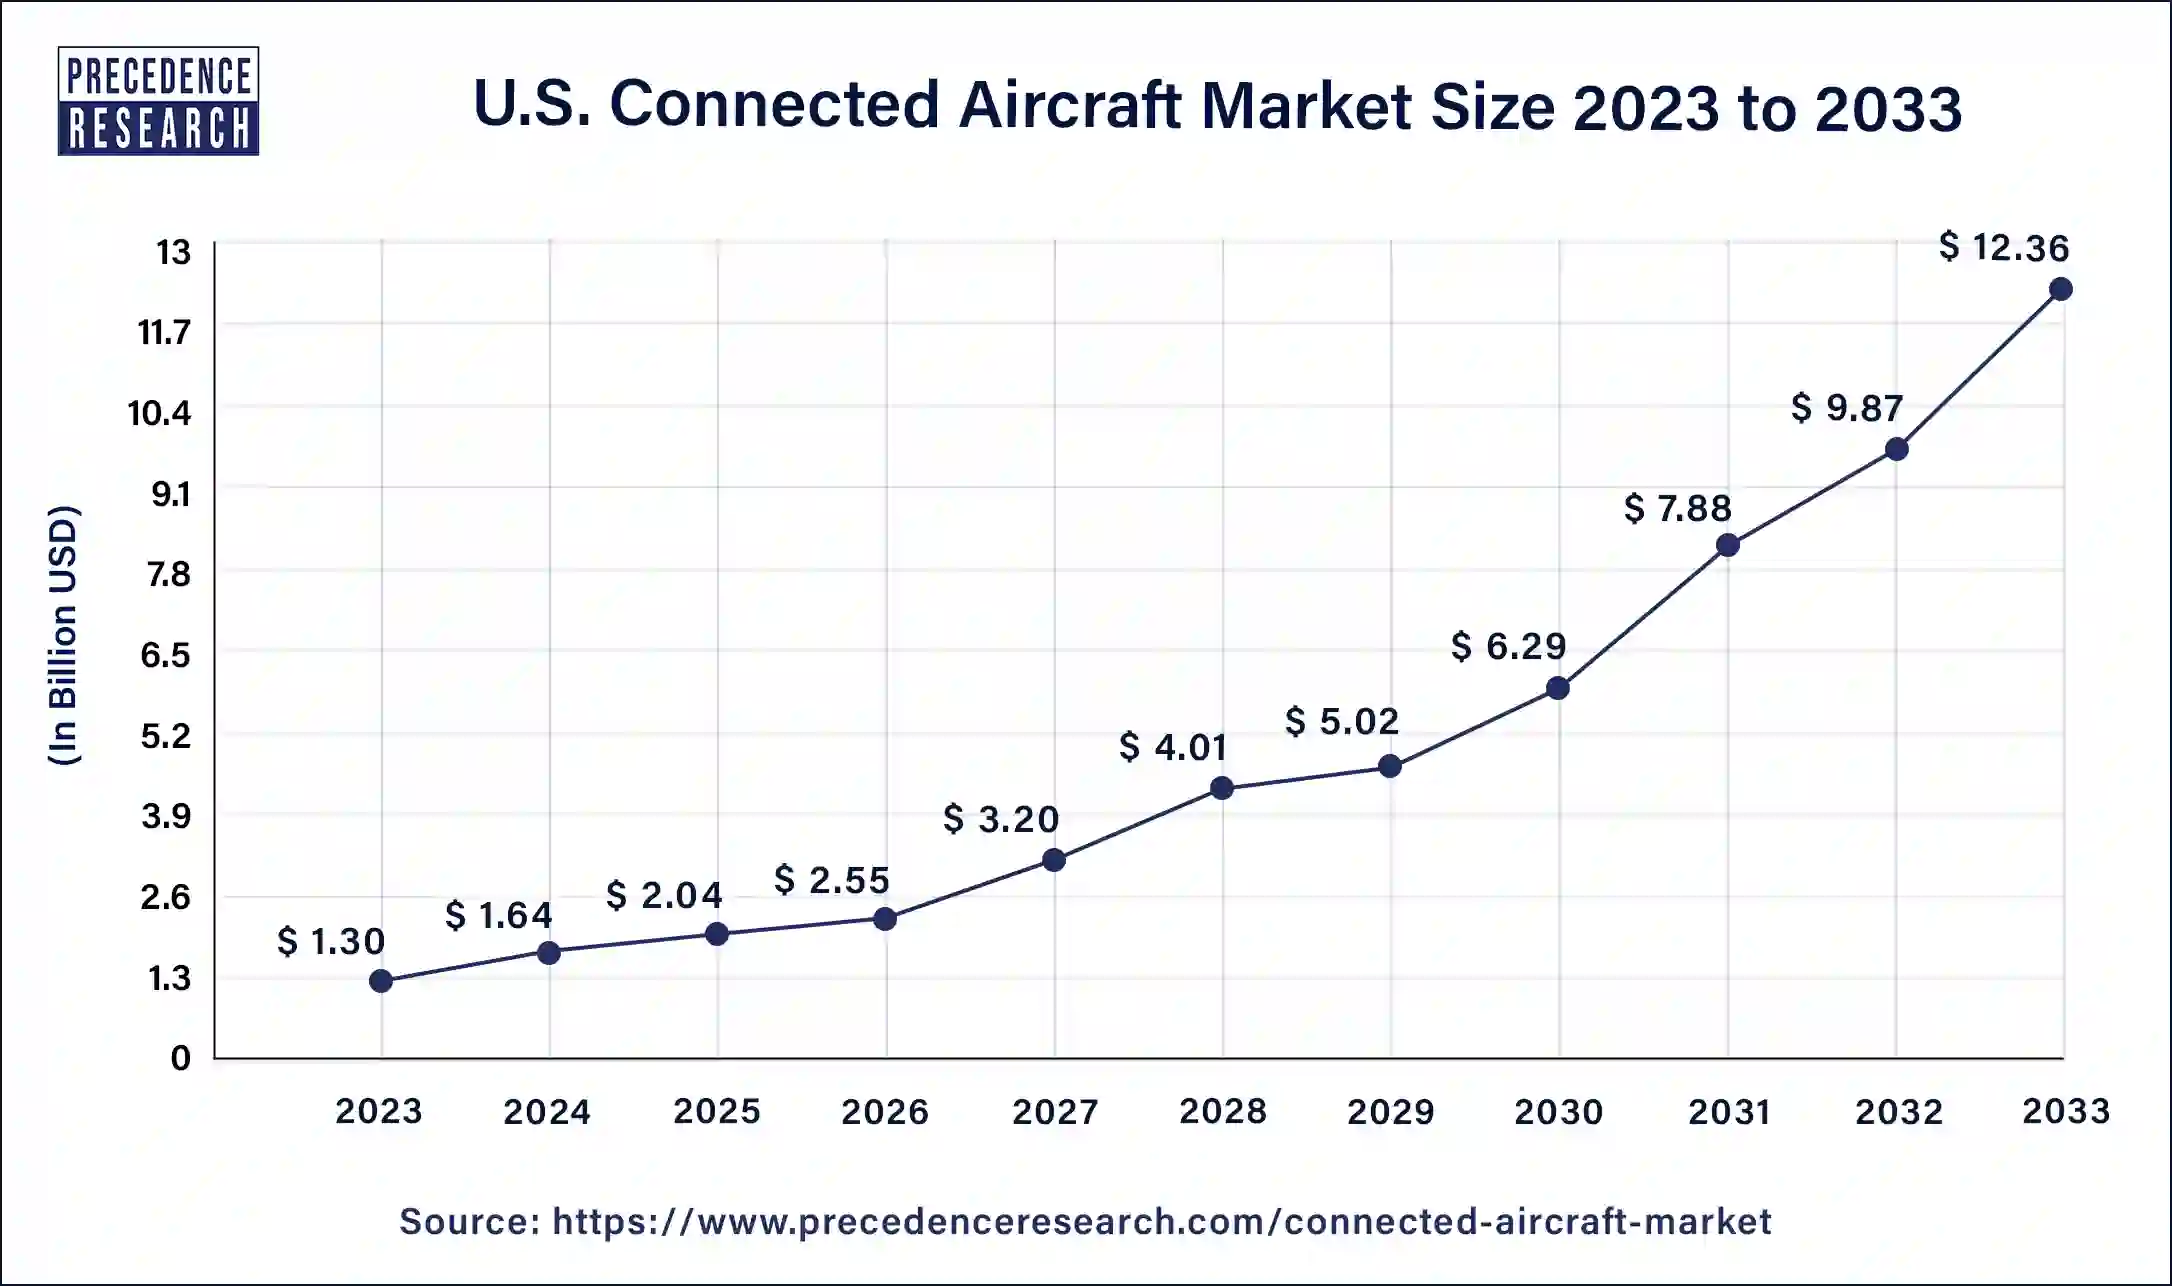 U.S. Connected Aircraft Market Size 2024 to 2033